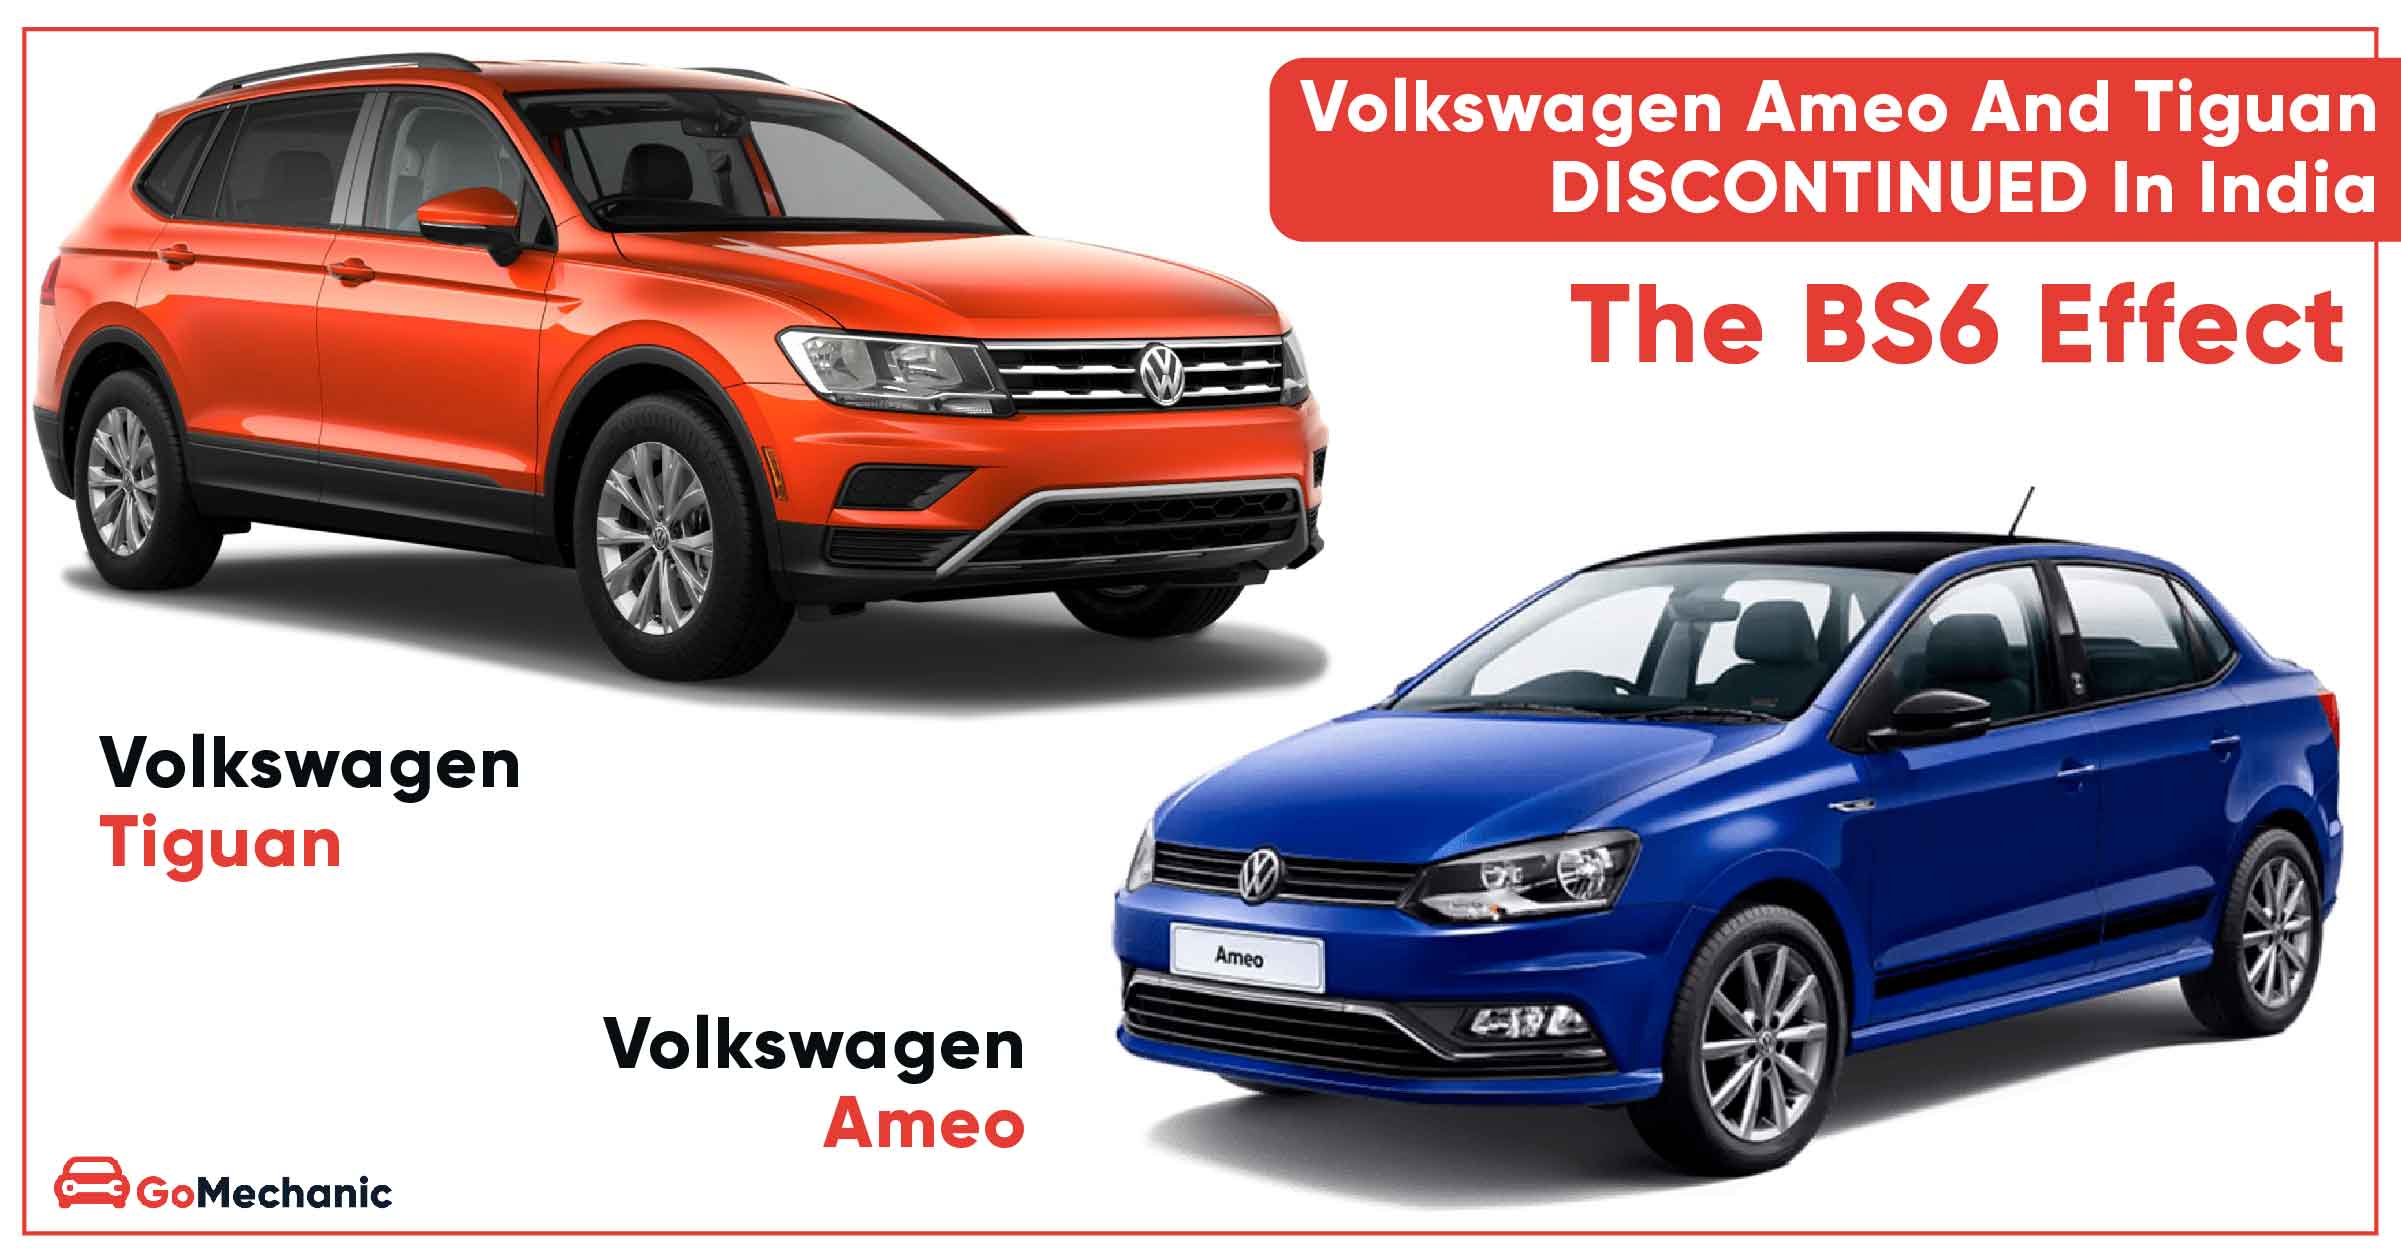 BS6 Effect: Volkswagen Ameo And Tiguan Discontinued In India